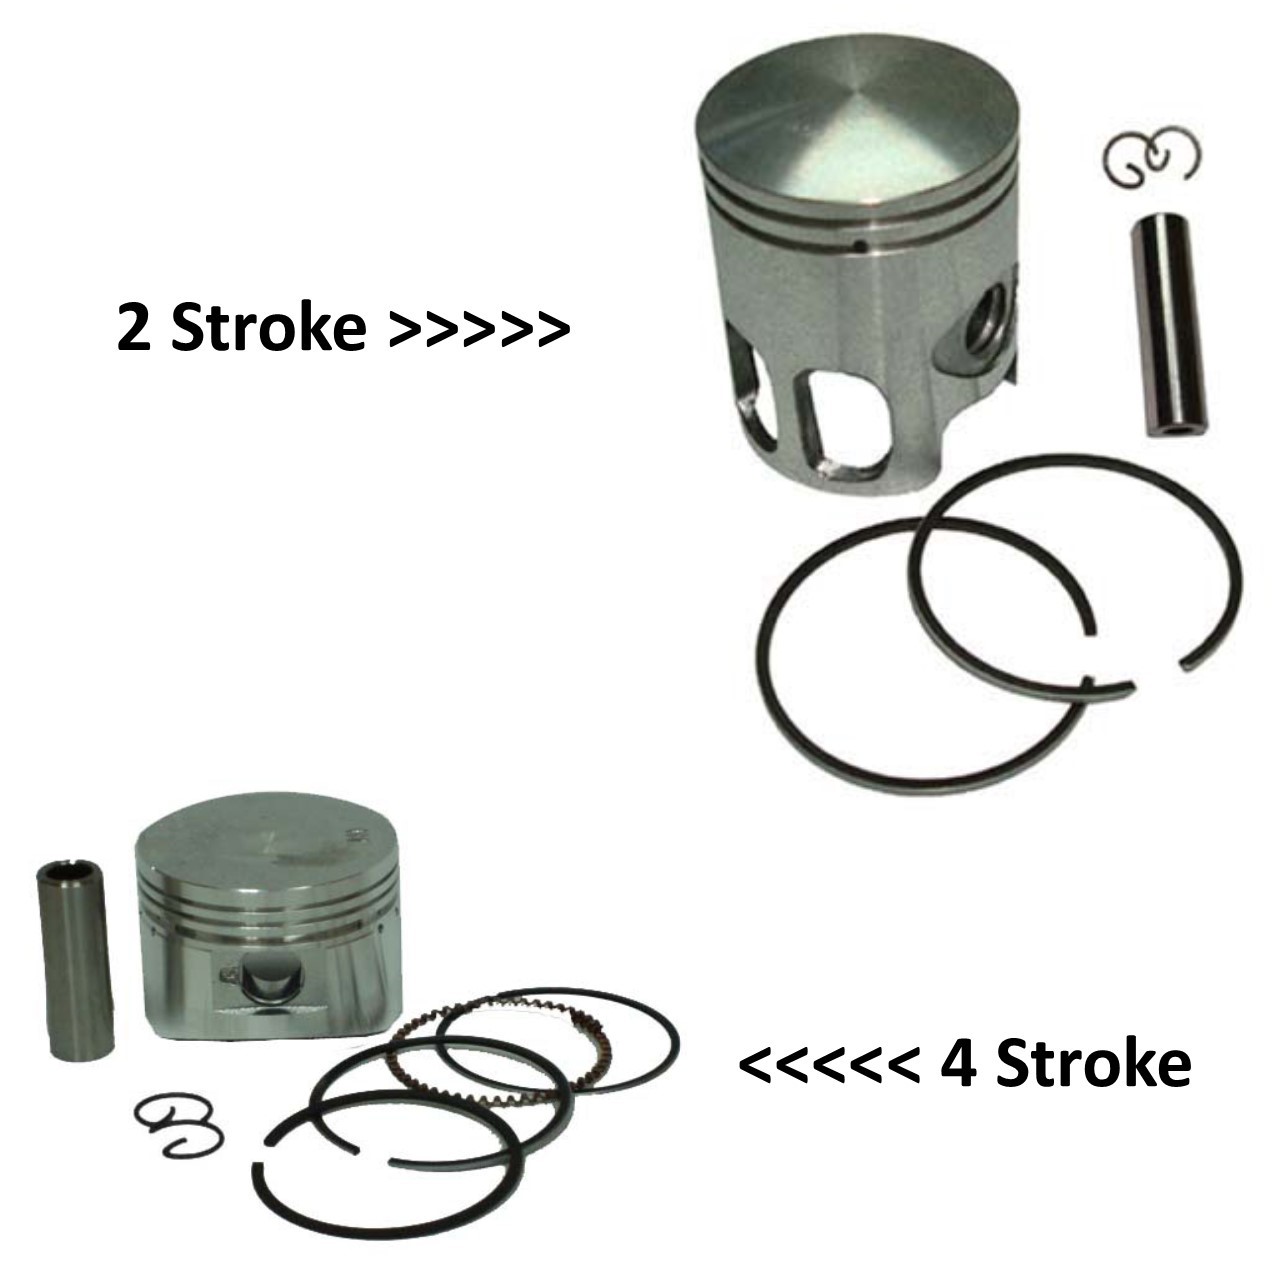 Piston Kits (2 and 4 Stroke) GY6,QMG,Honda Type,CG,Jog,+More For 40-260cc Engines